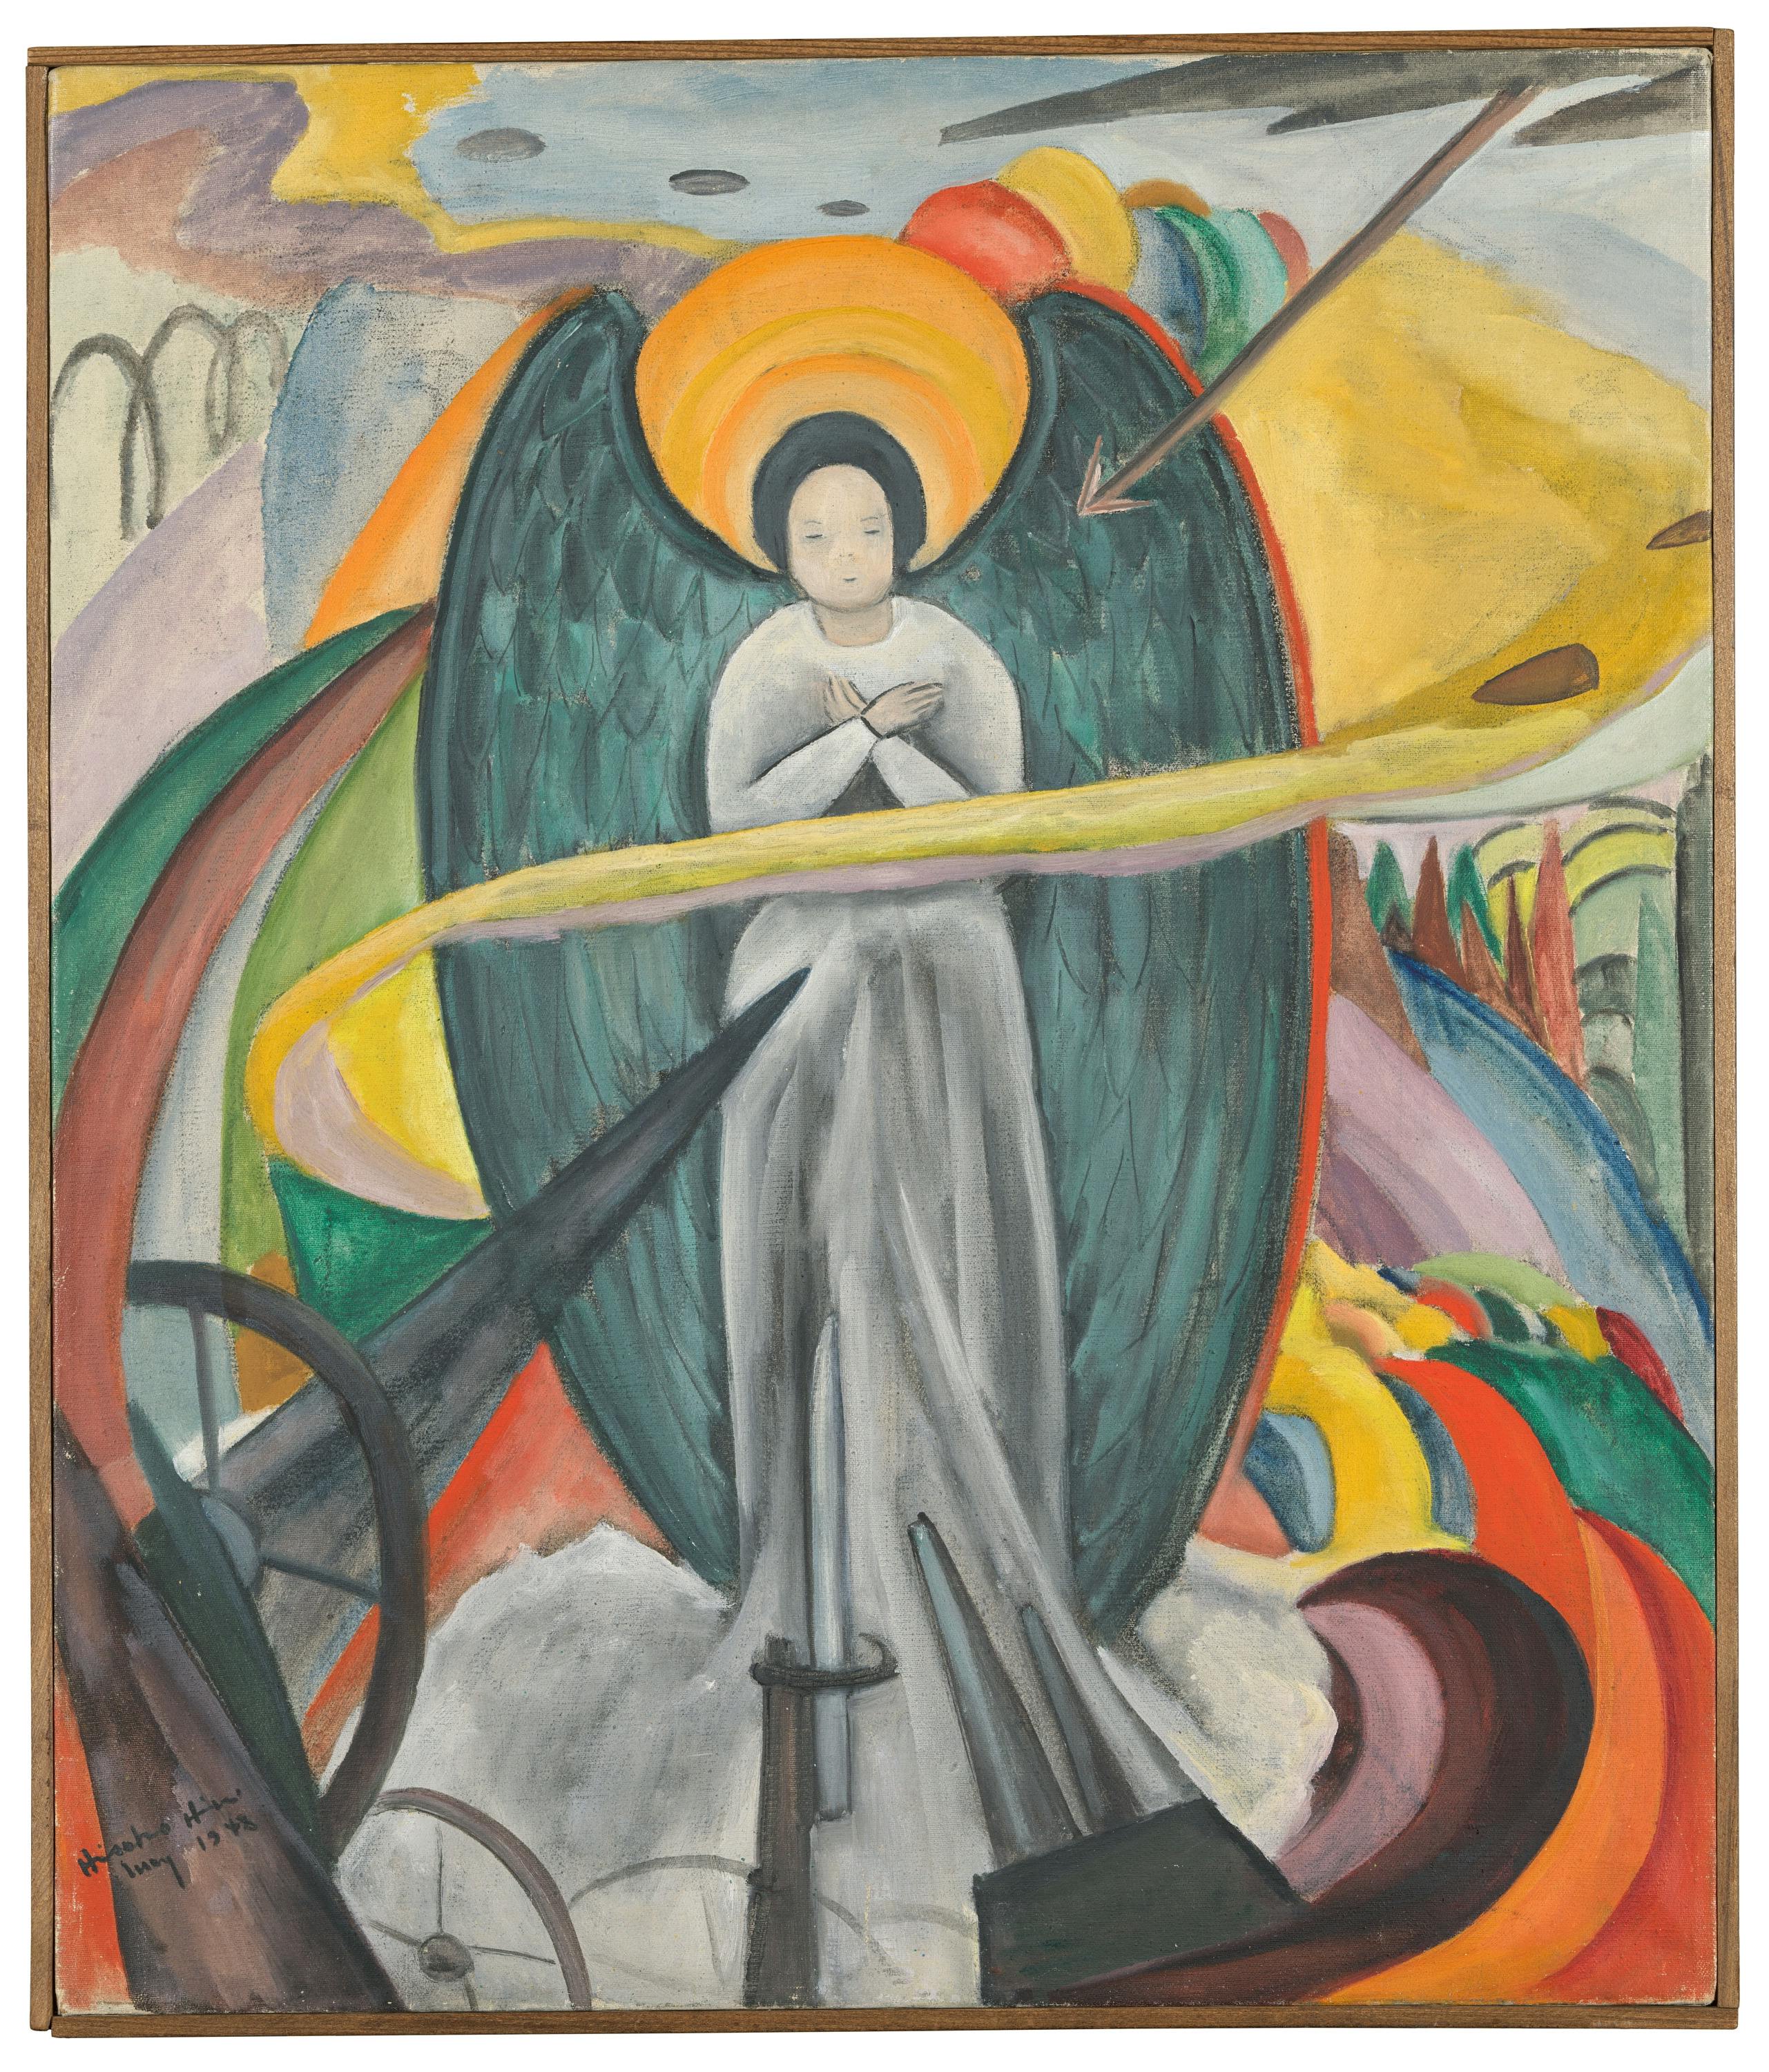 Colorful painting of an angel standing with its arms crossed facing weapons.